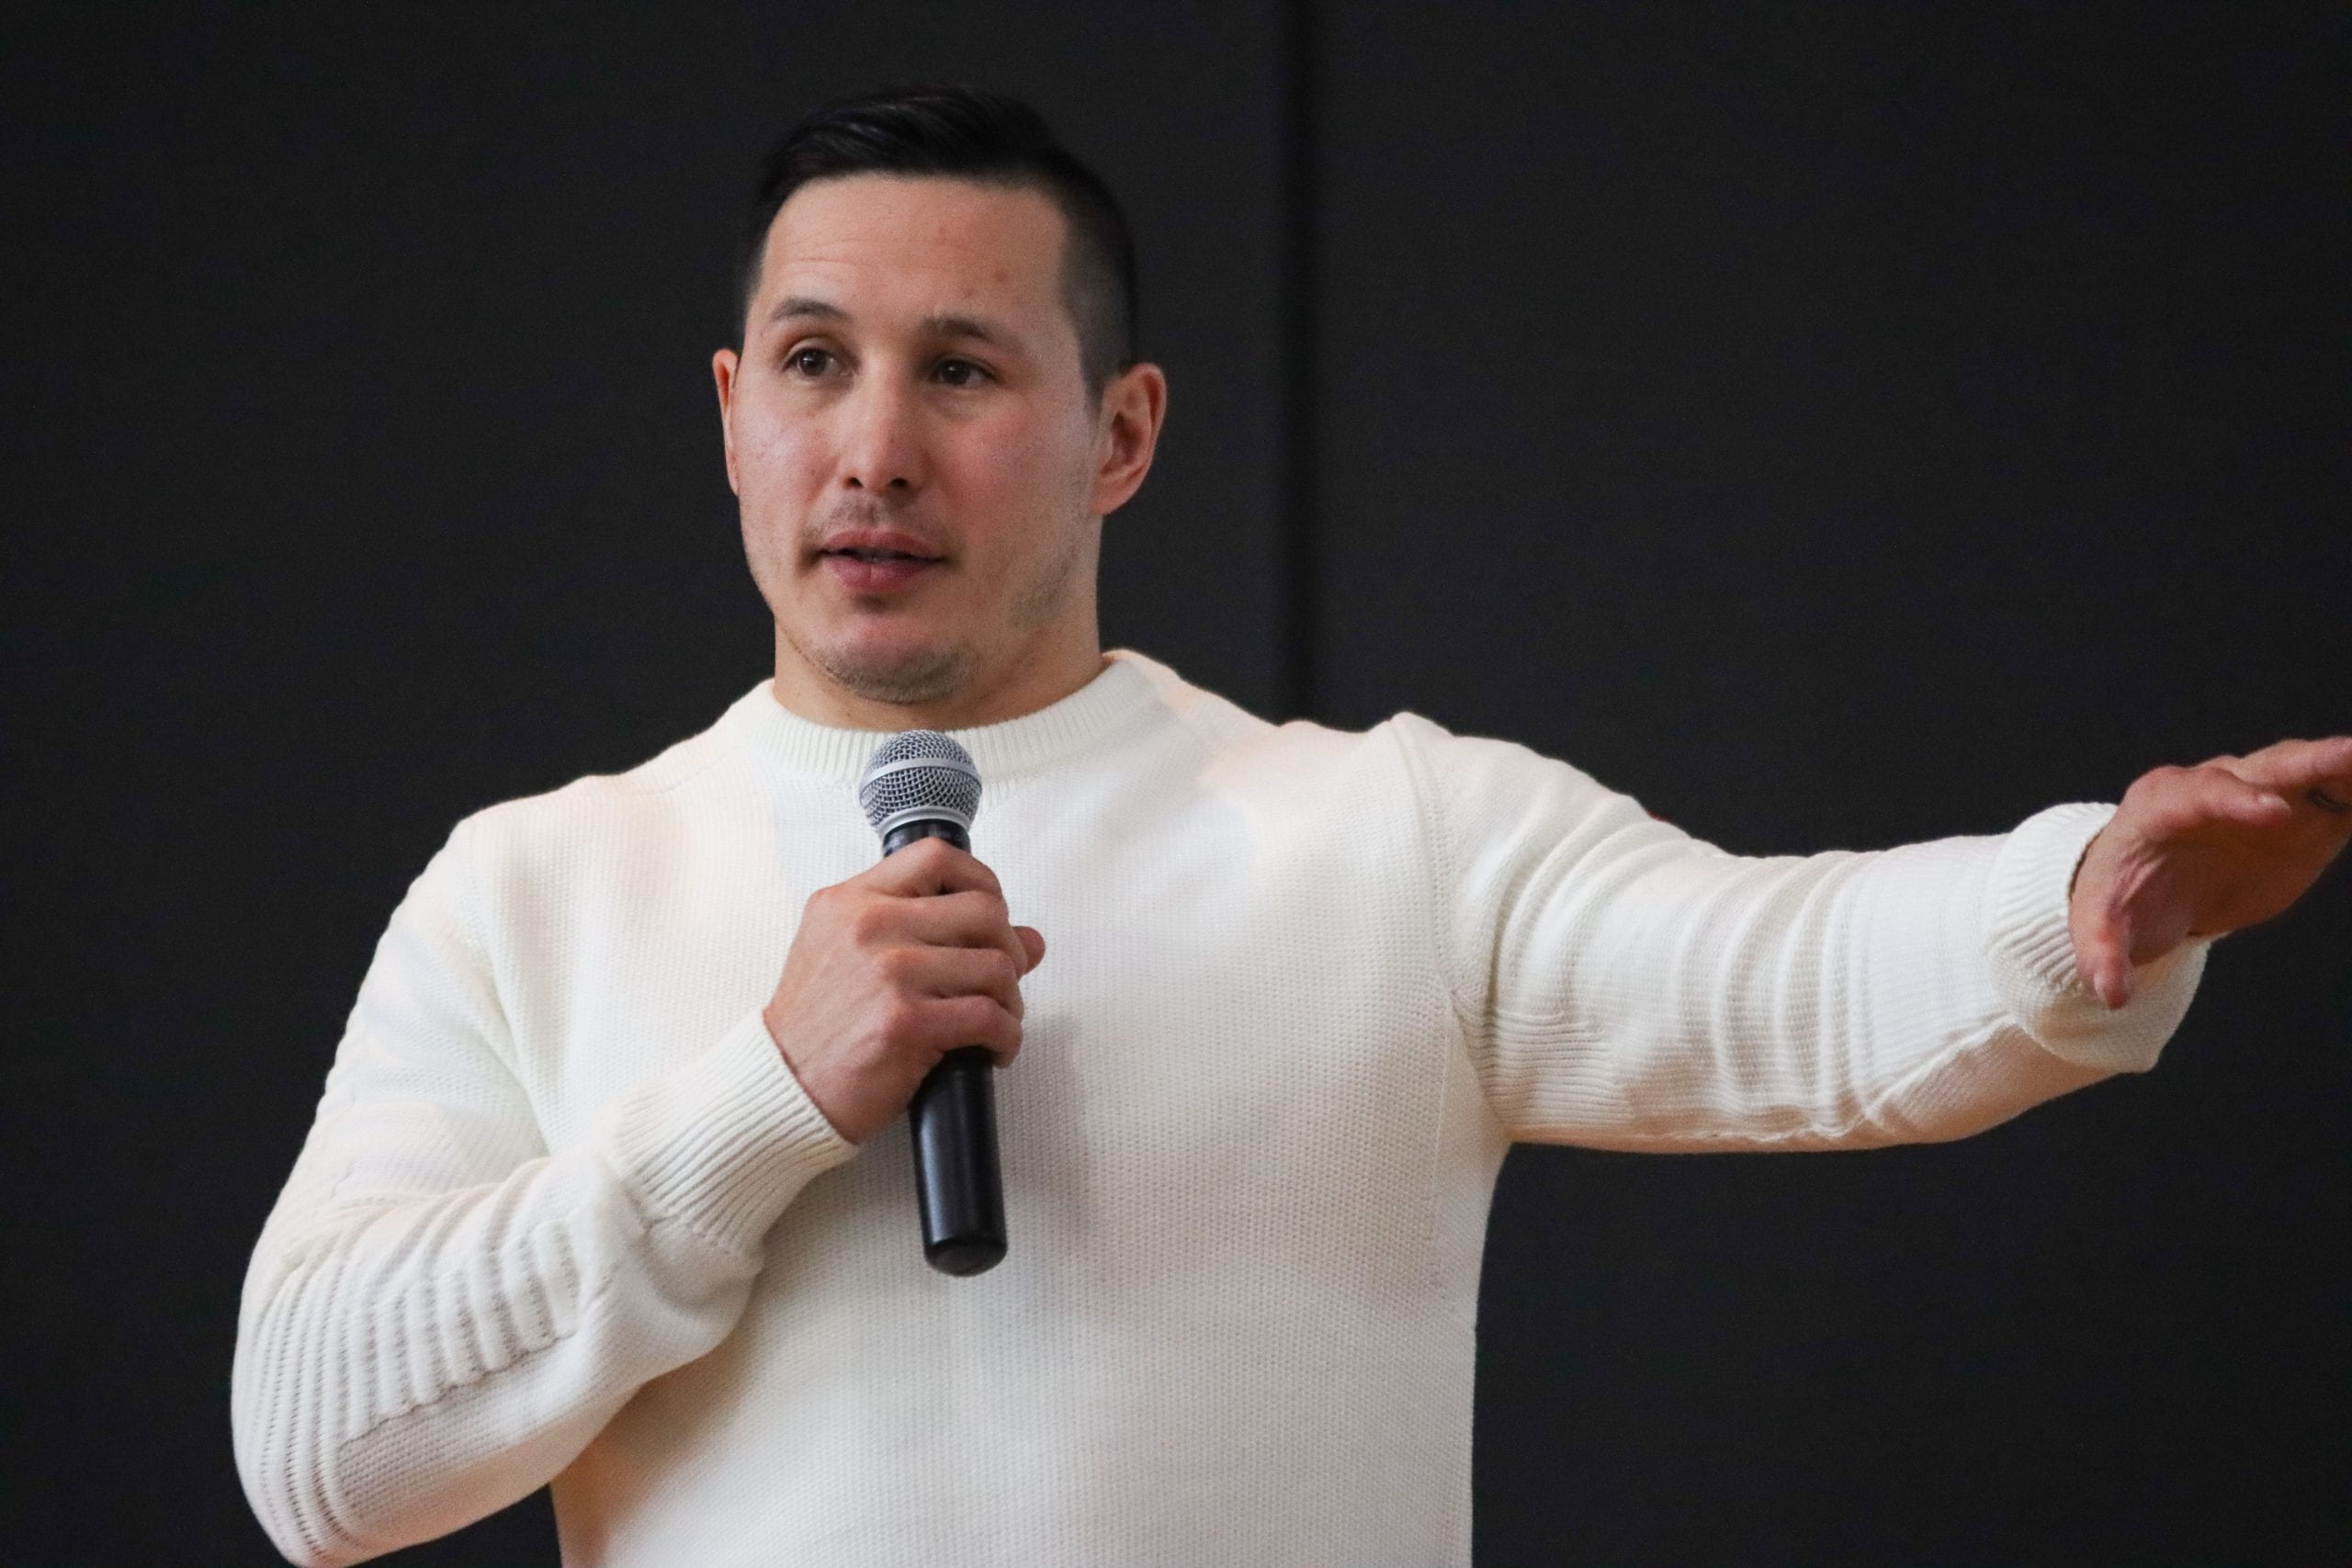 Jordin Tootoo: Nashville Predators Forward a Role Model for Overcoming  Adversity, News, Scores, Highlights, Stats, and Rumors